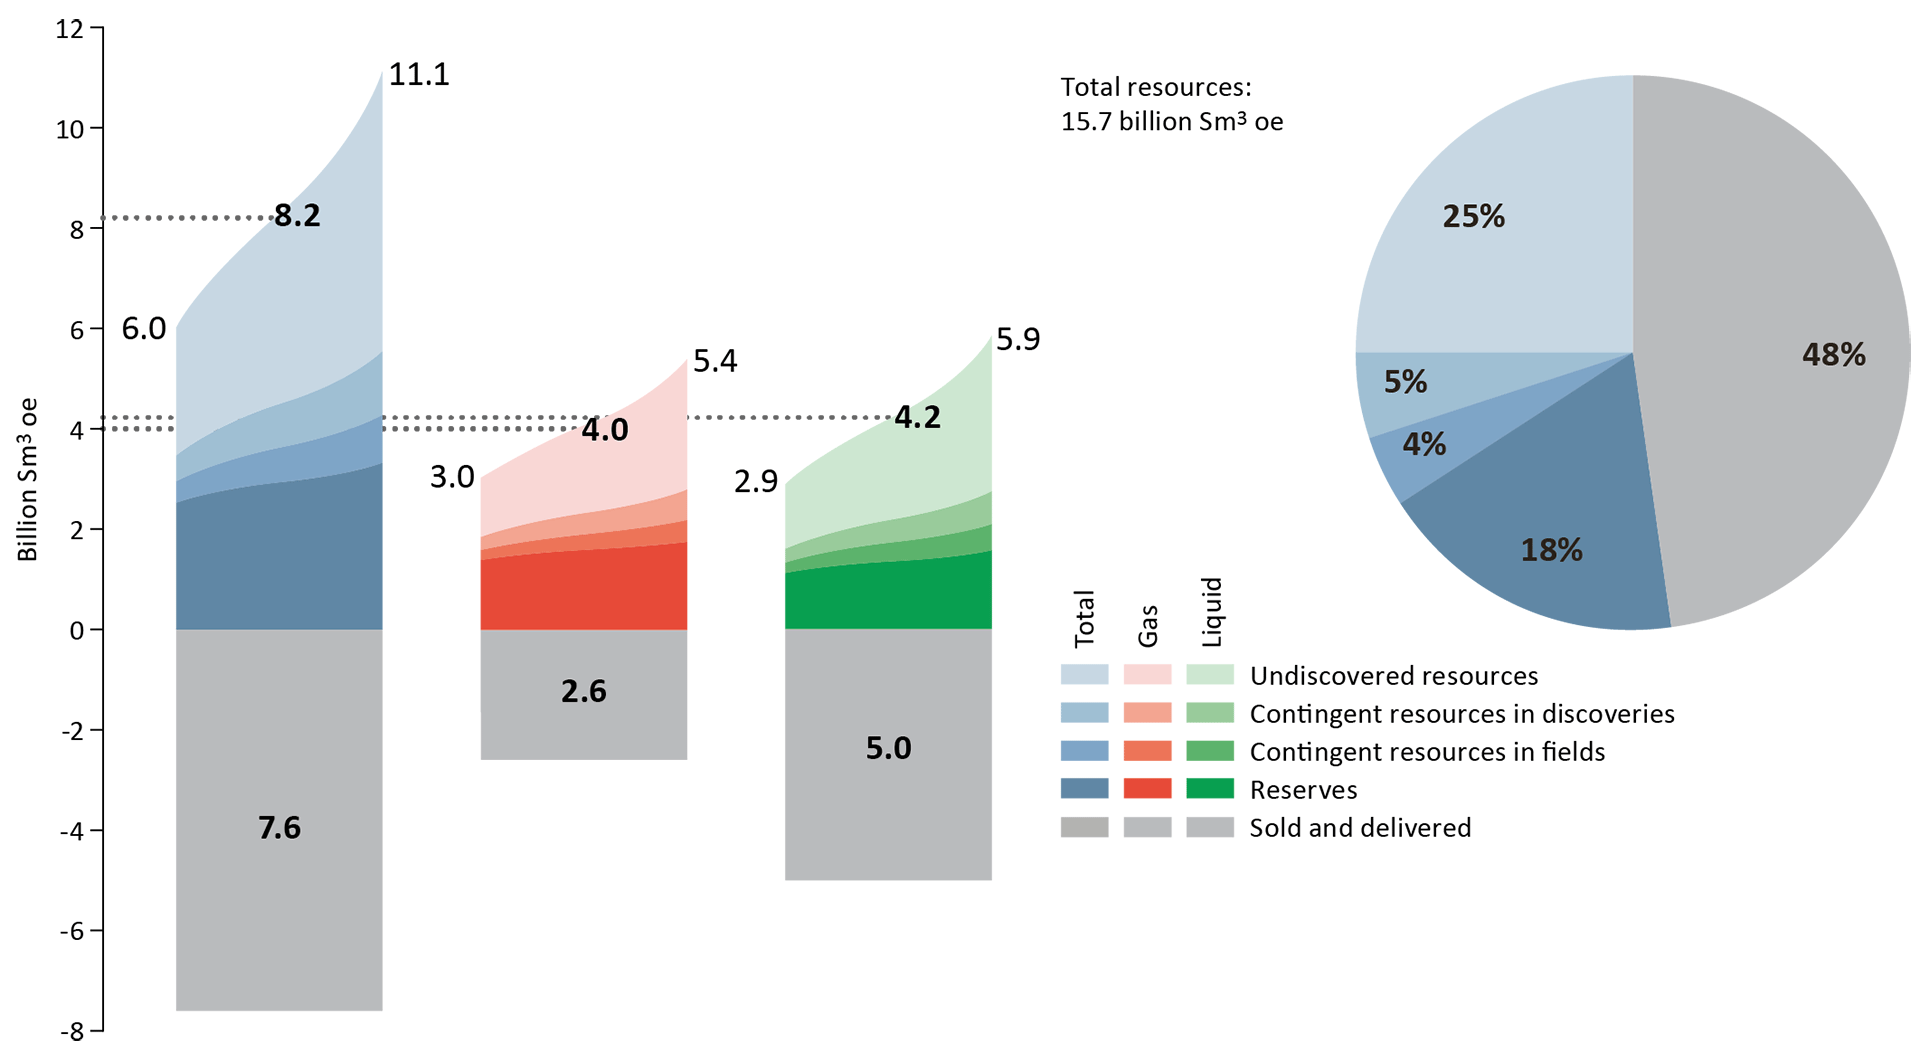 Illustration of petroleum resources and uncertainty in estimates at 31 December 2019